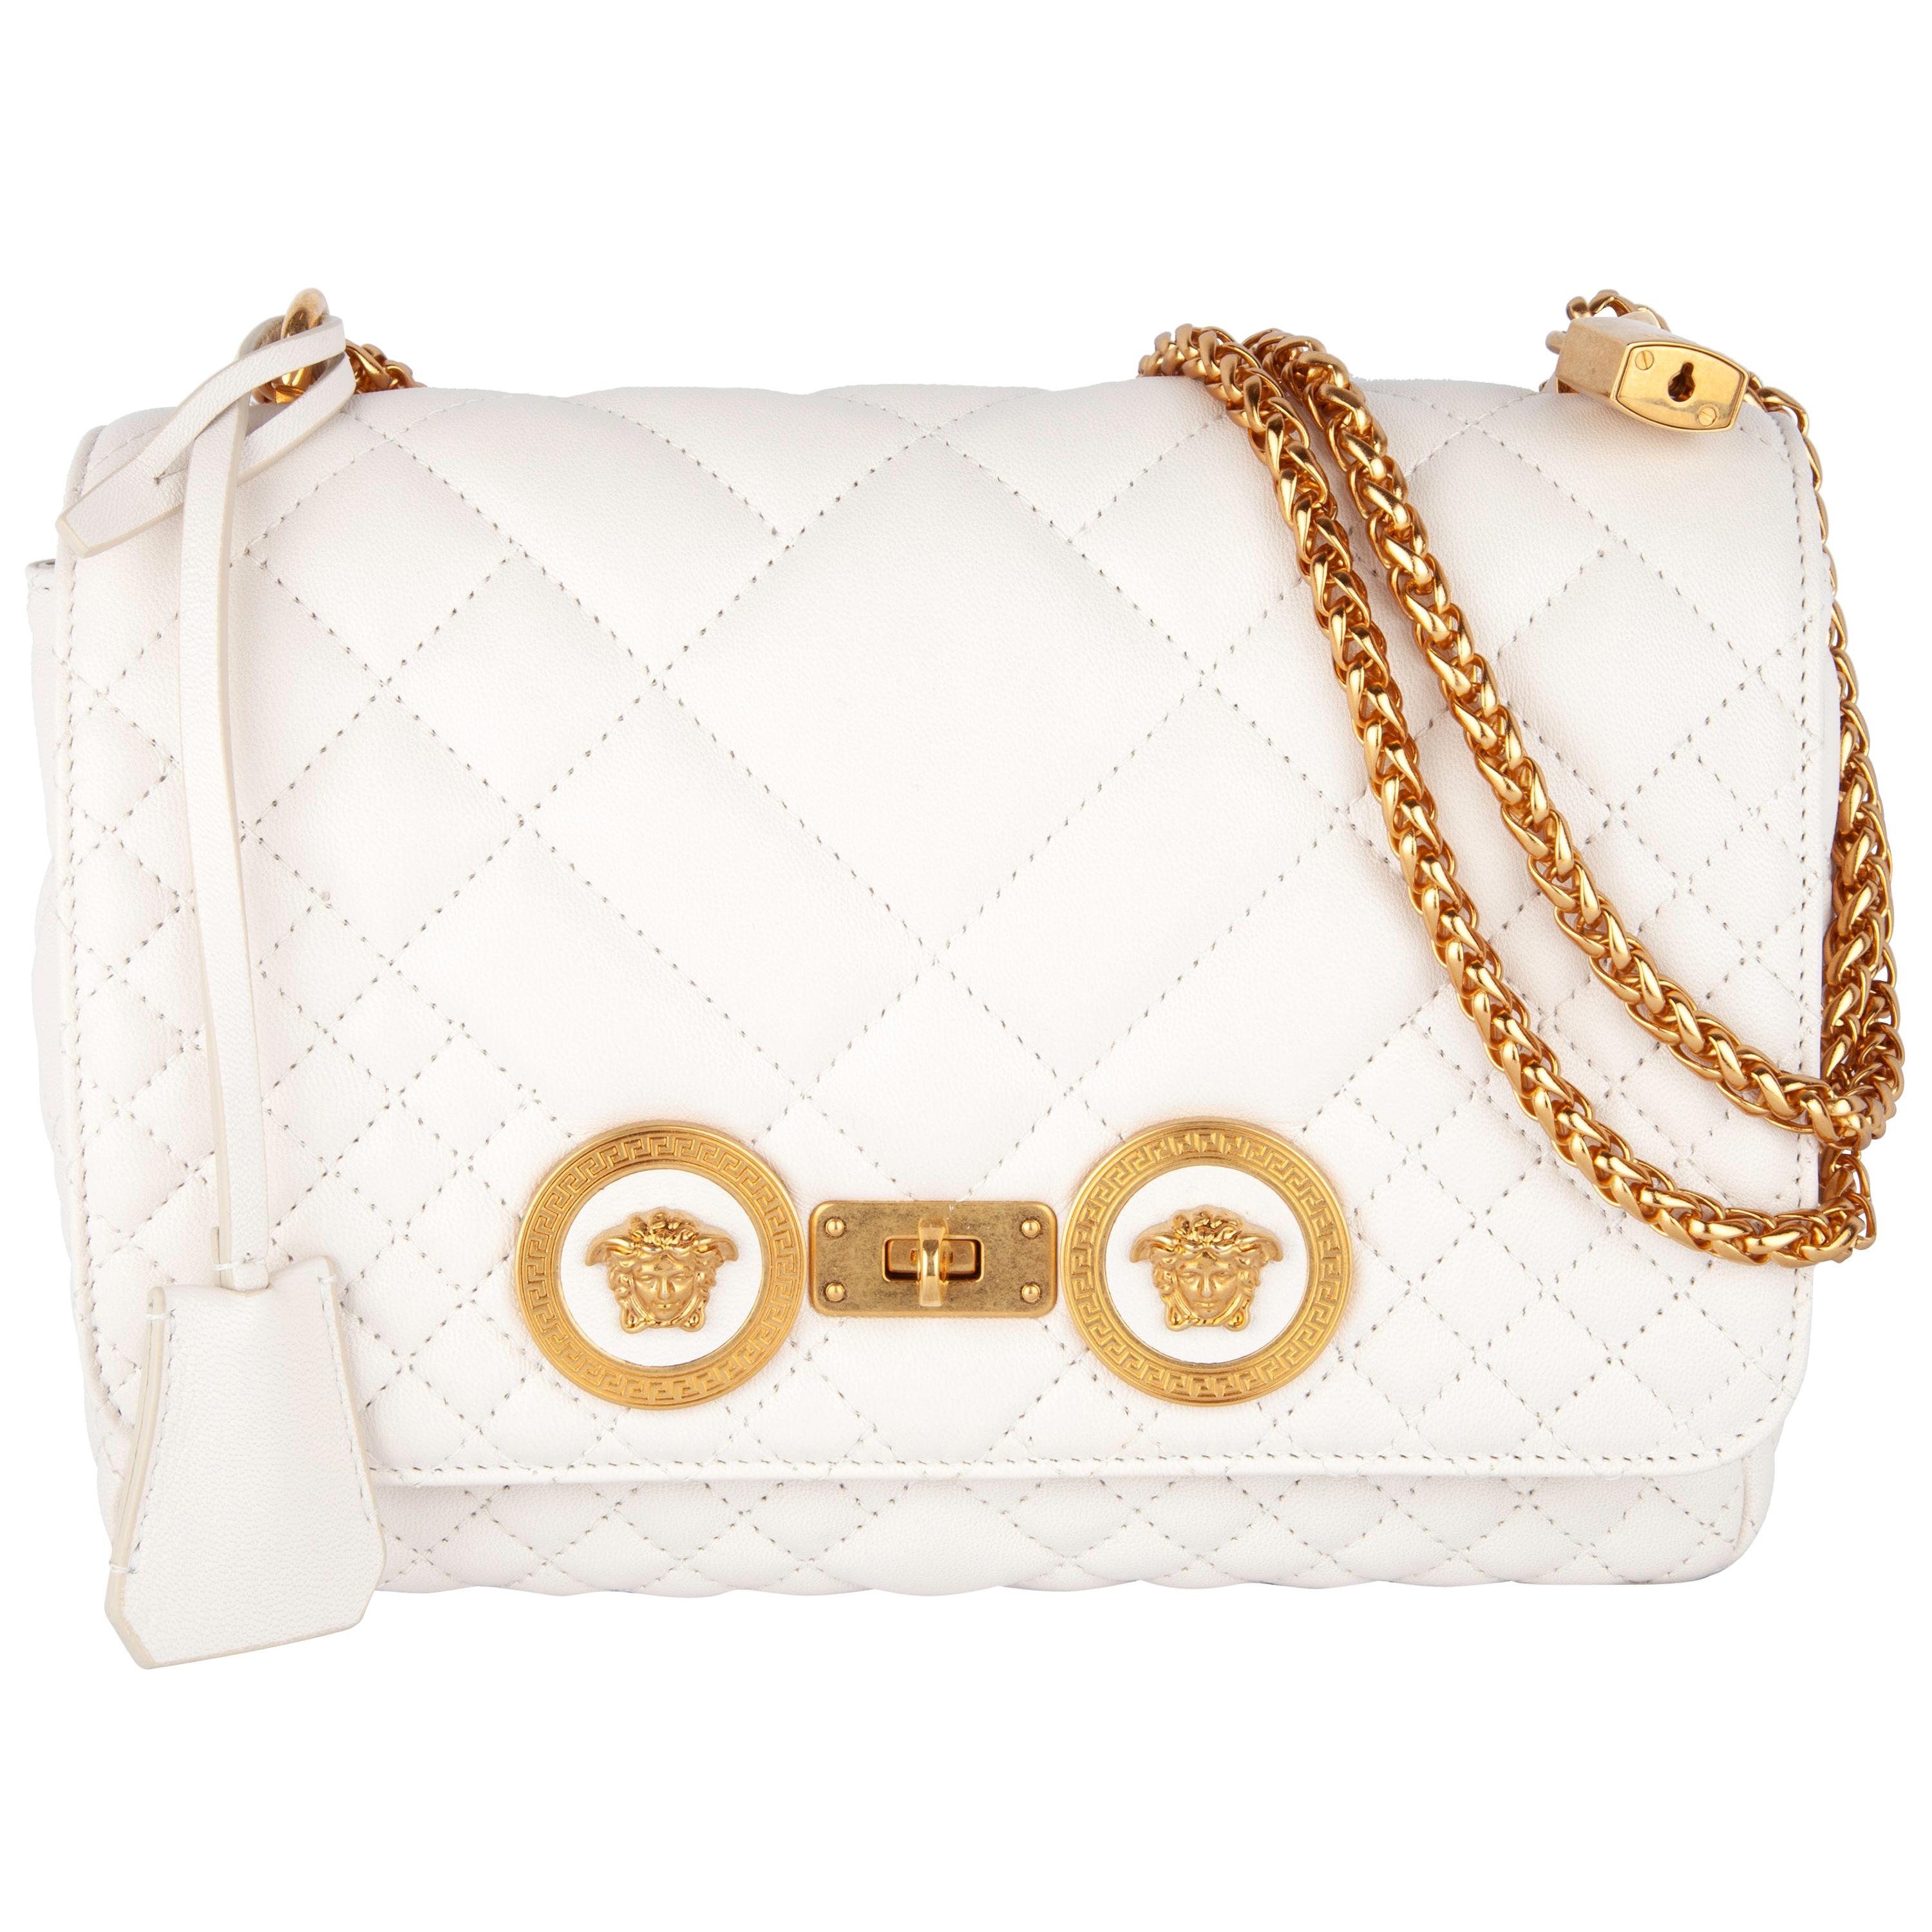 Versace Medium White Quilted Leather Icon Shoulder Bag W/ Gold Tone Metal Chain 